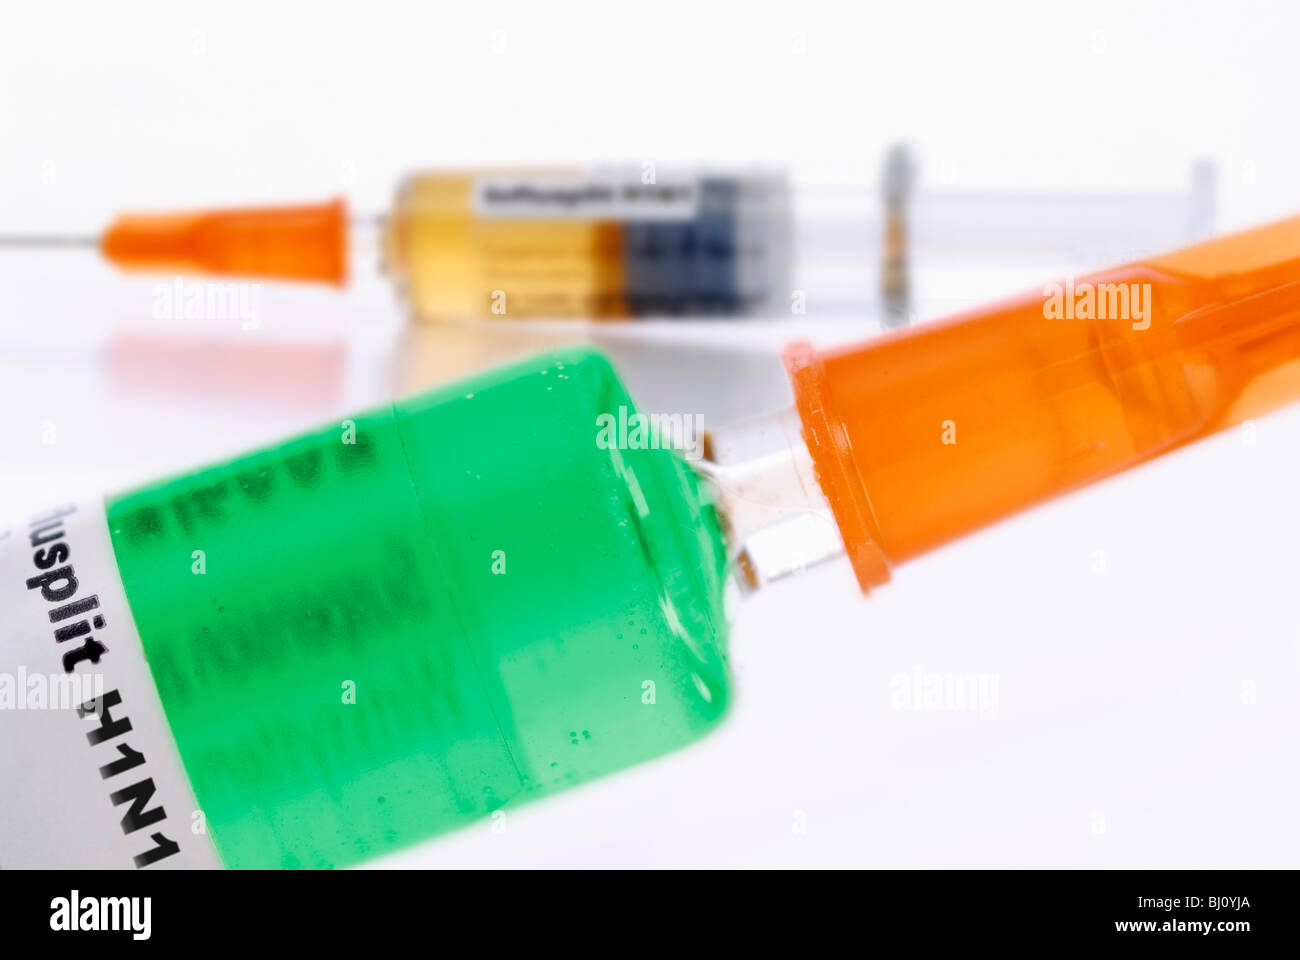 Different vaccines against swine flu in two syringes Stock Photo